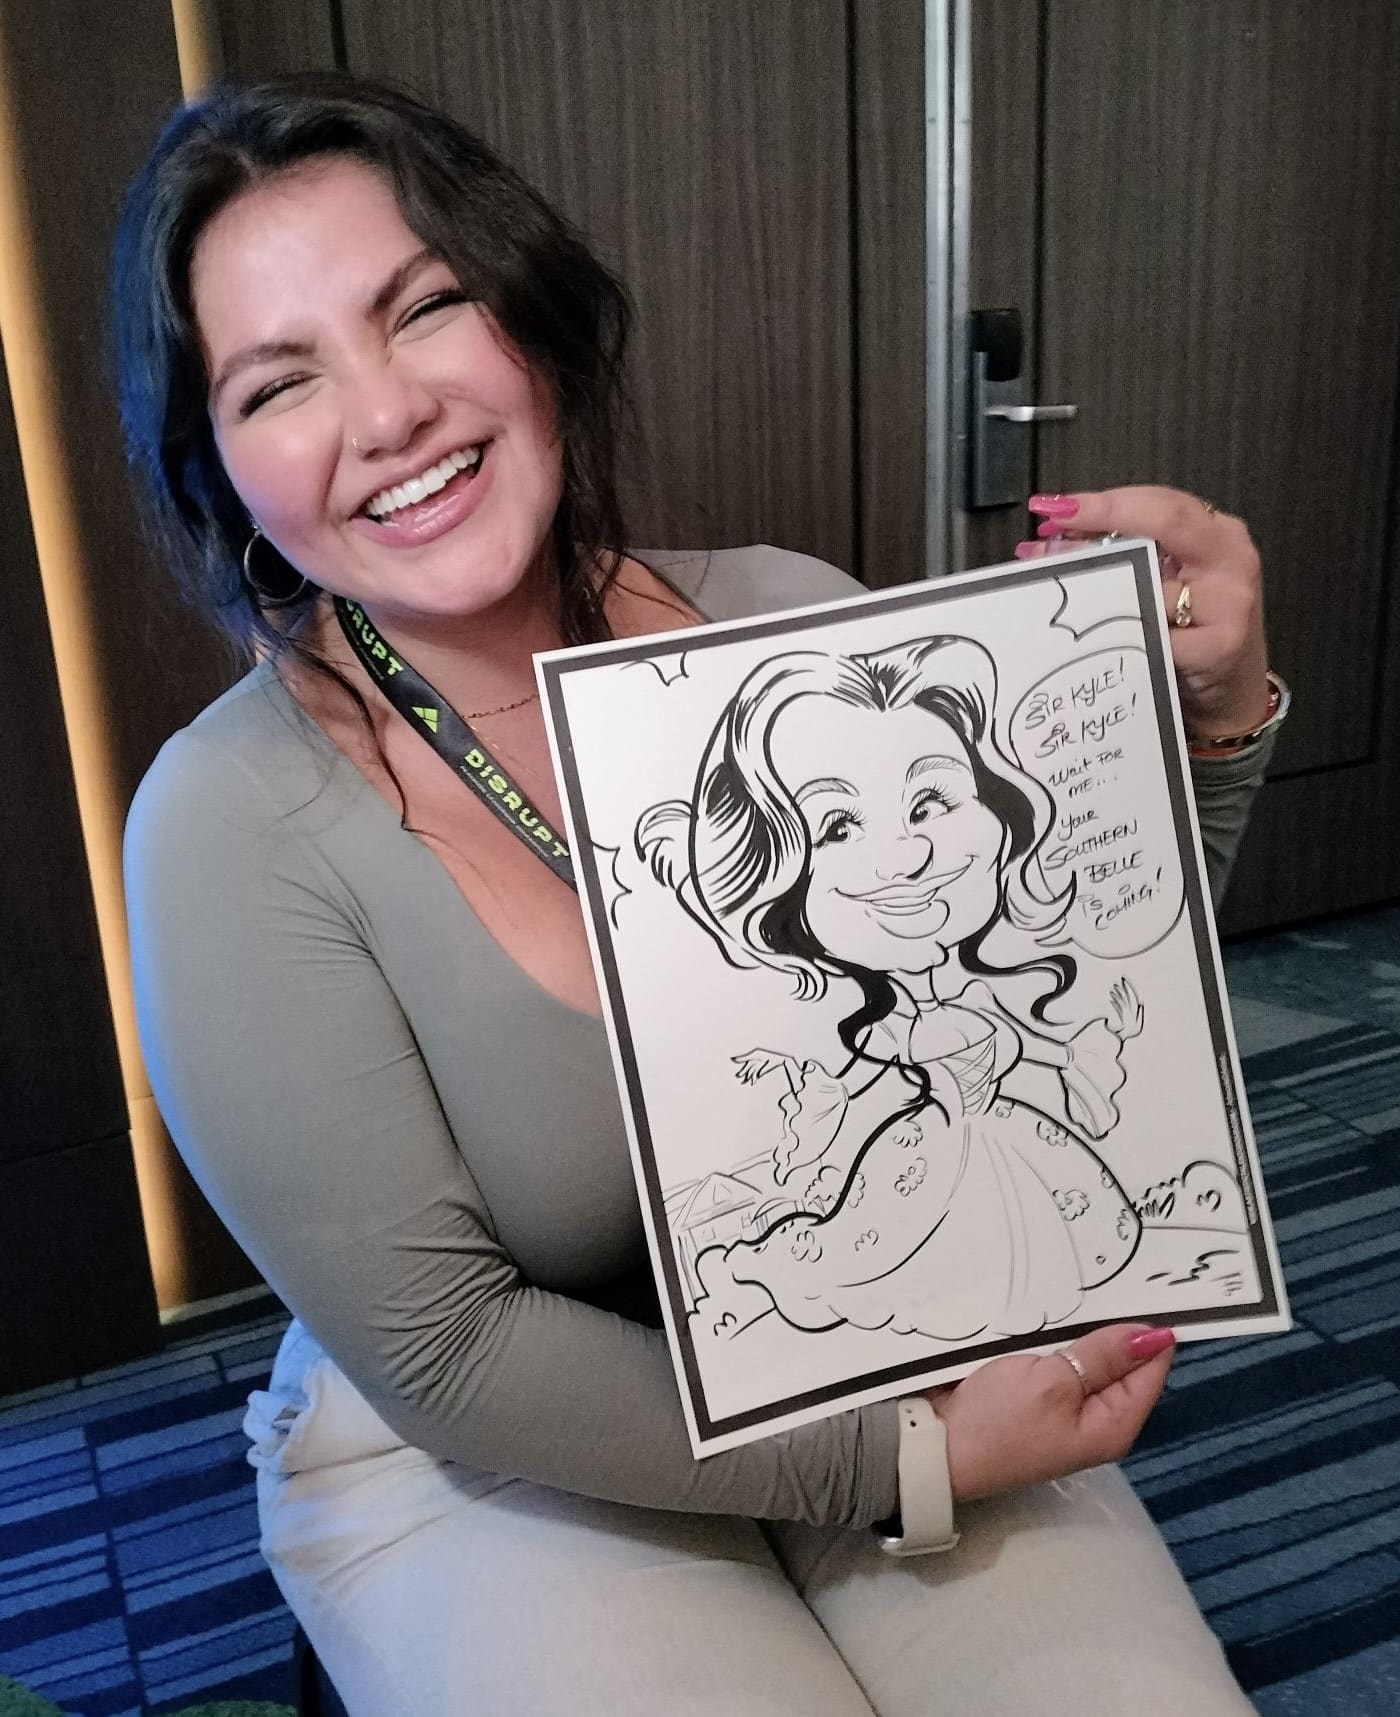 woman holding caricature drawing of herself